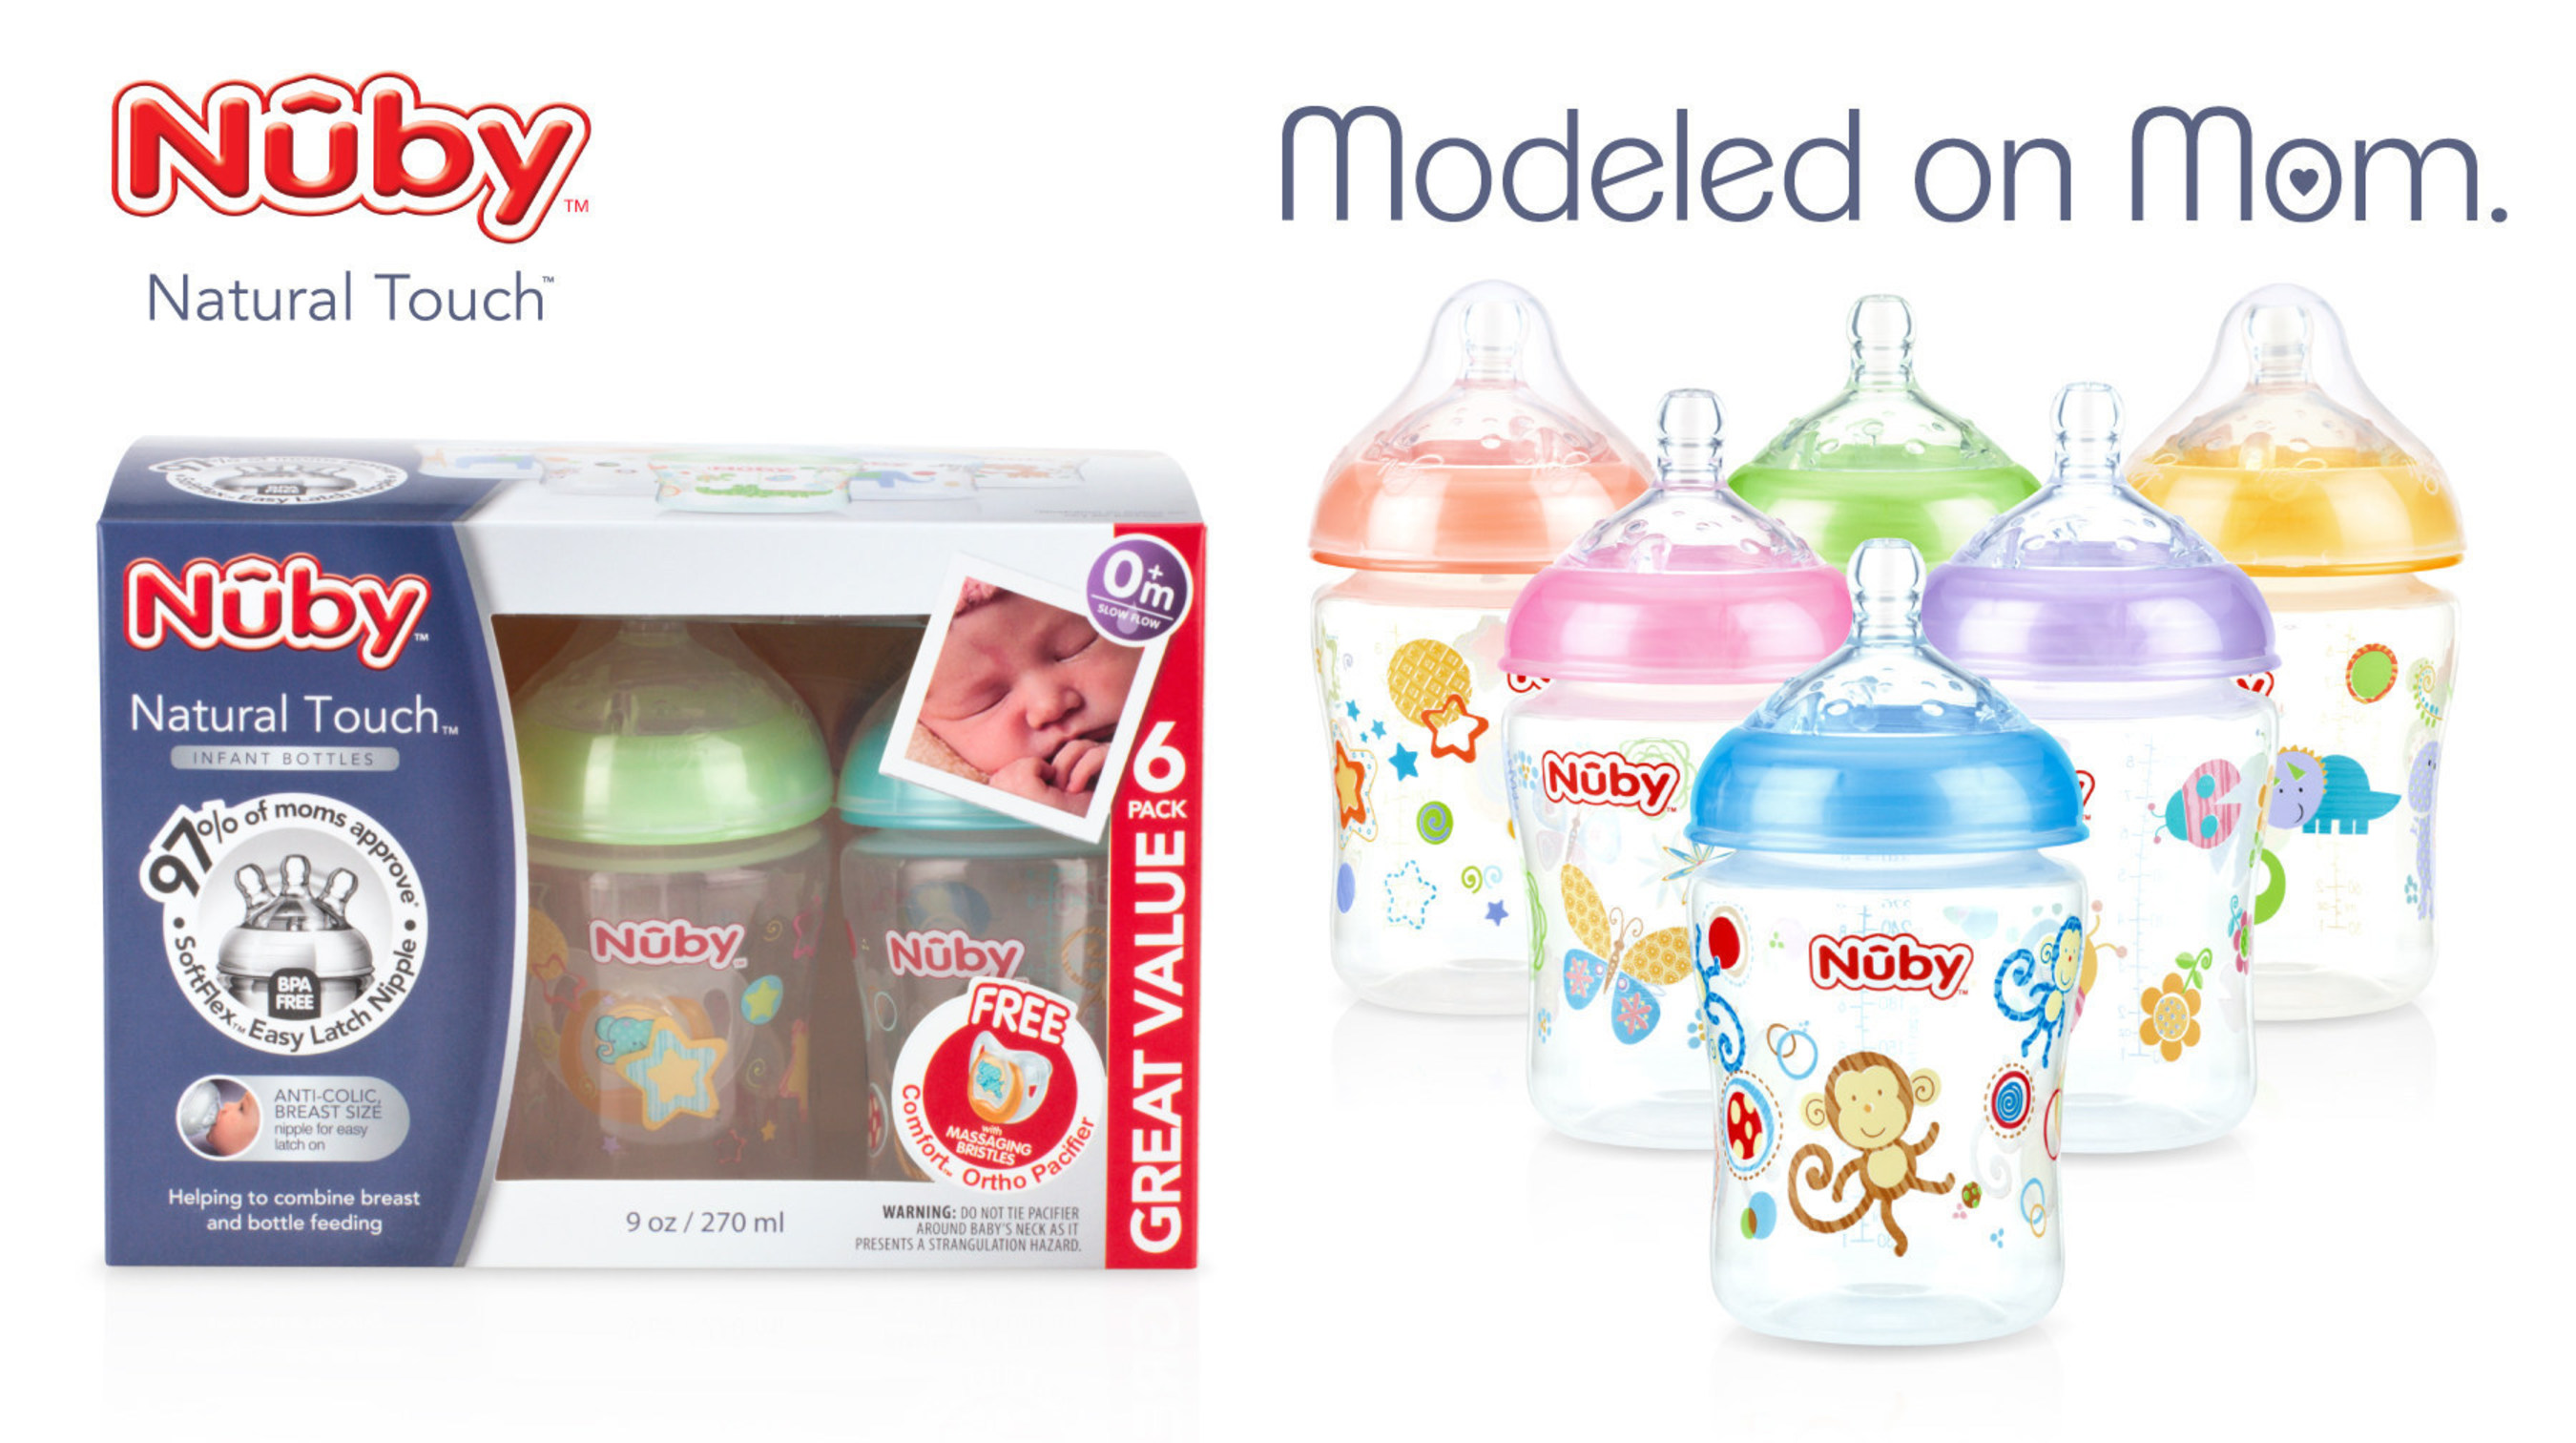 NUBY(TM) LAUNCHES NEW NATURAL TOUCH(TM) BOTTLE RANGE WITH SOFTFLEX(TM) EASY LATCH NIPPLE